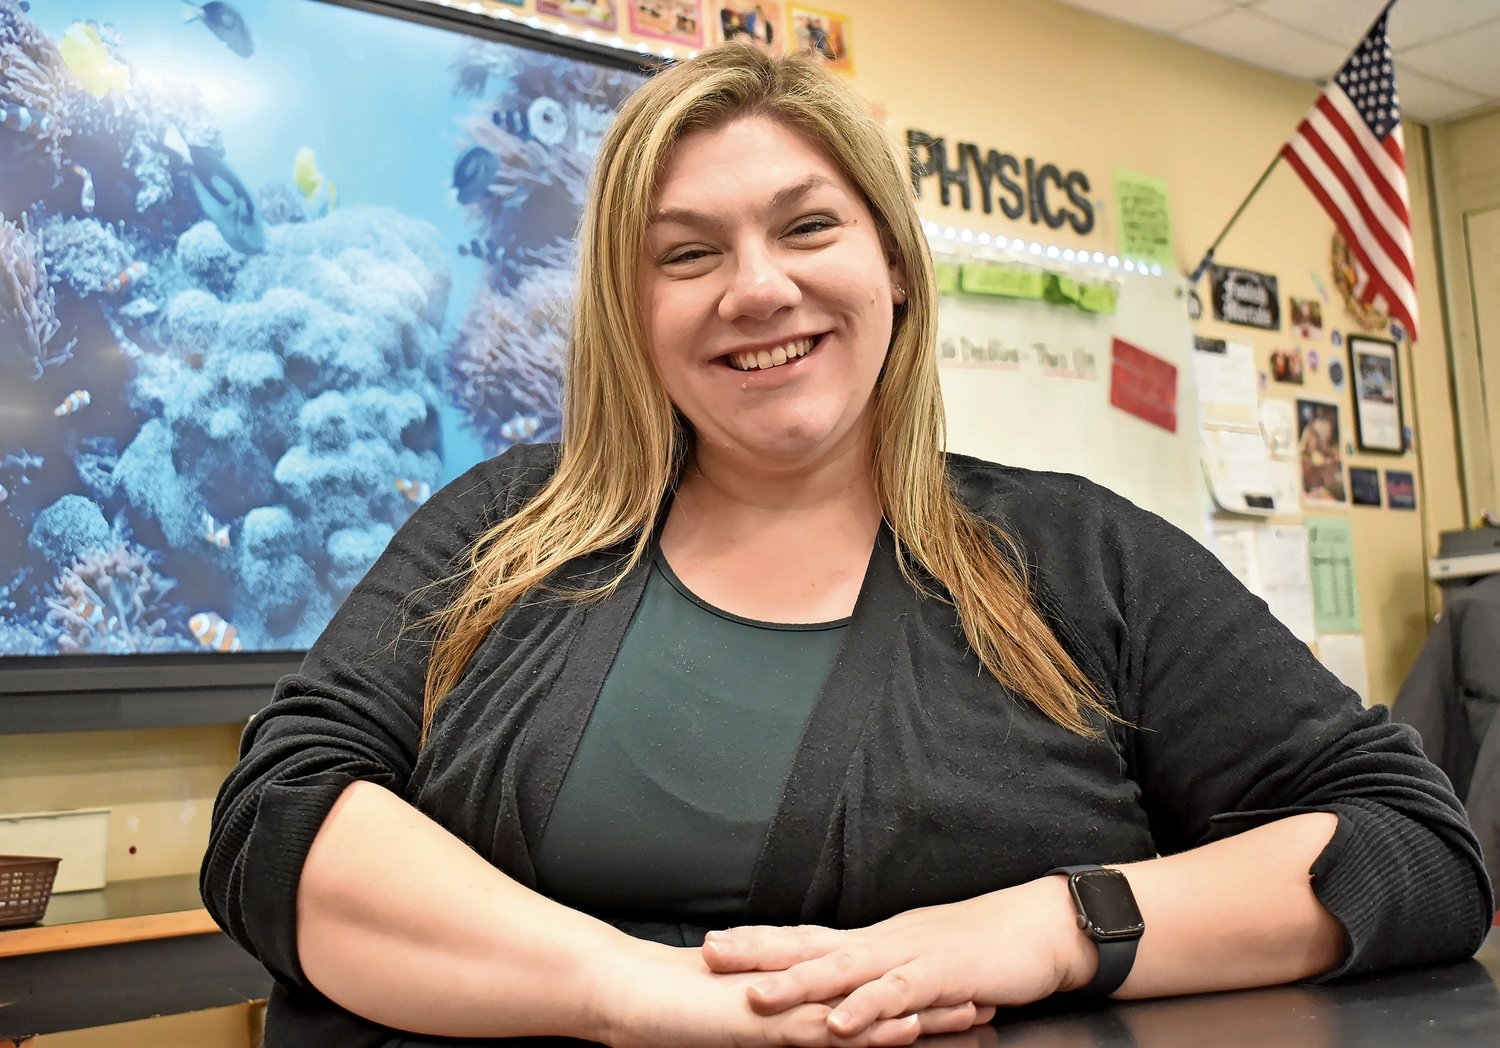 Wantagh High School physics teacher Samantha Gordon was accepted into the New York state master teacher program, which will offer her new opportunities for professional development.